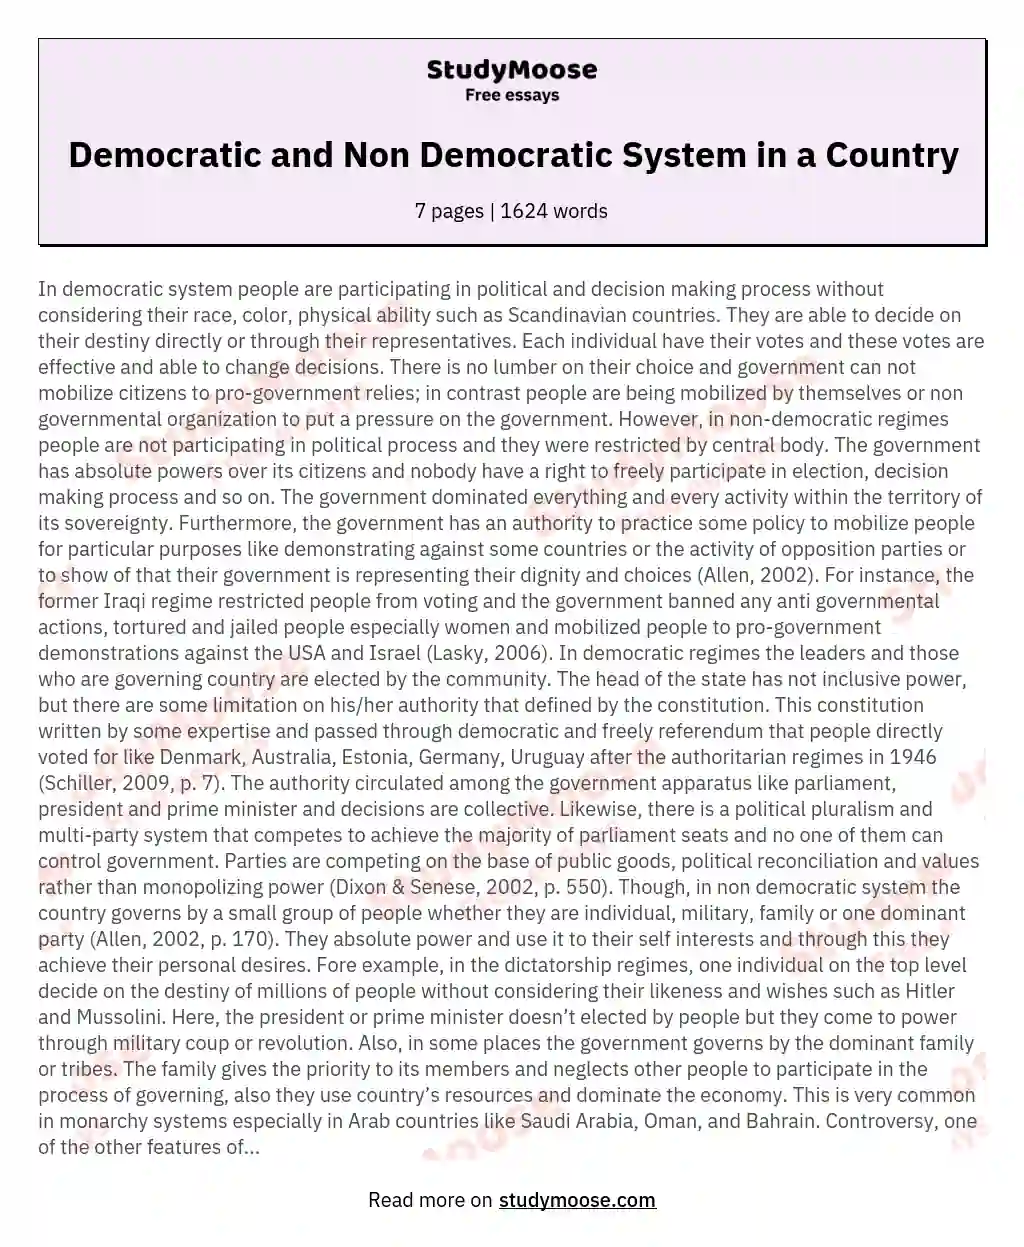 Democratic and Non Democratic System in a Country